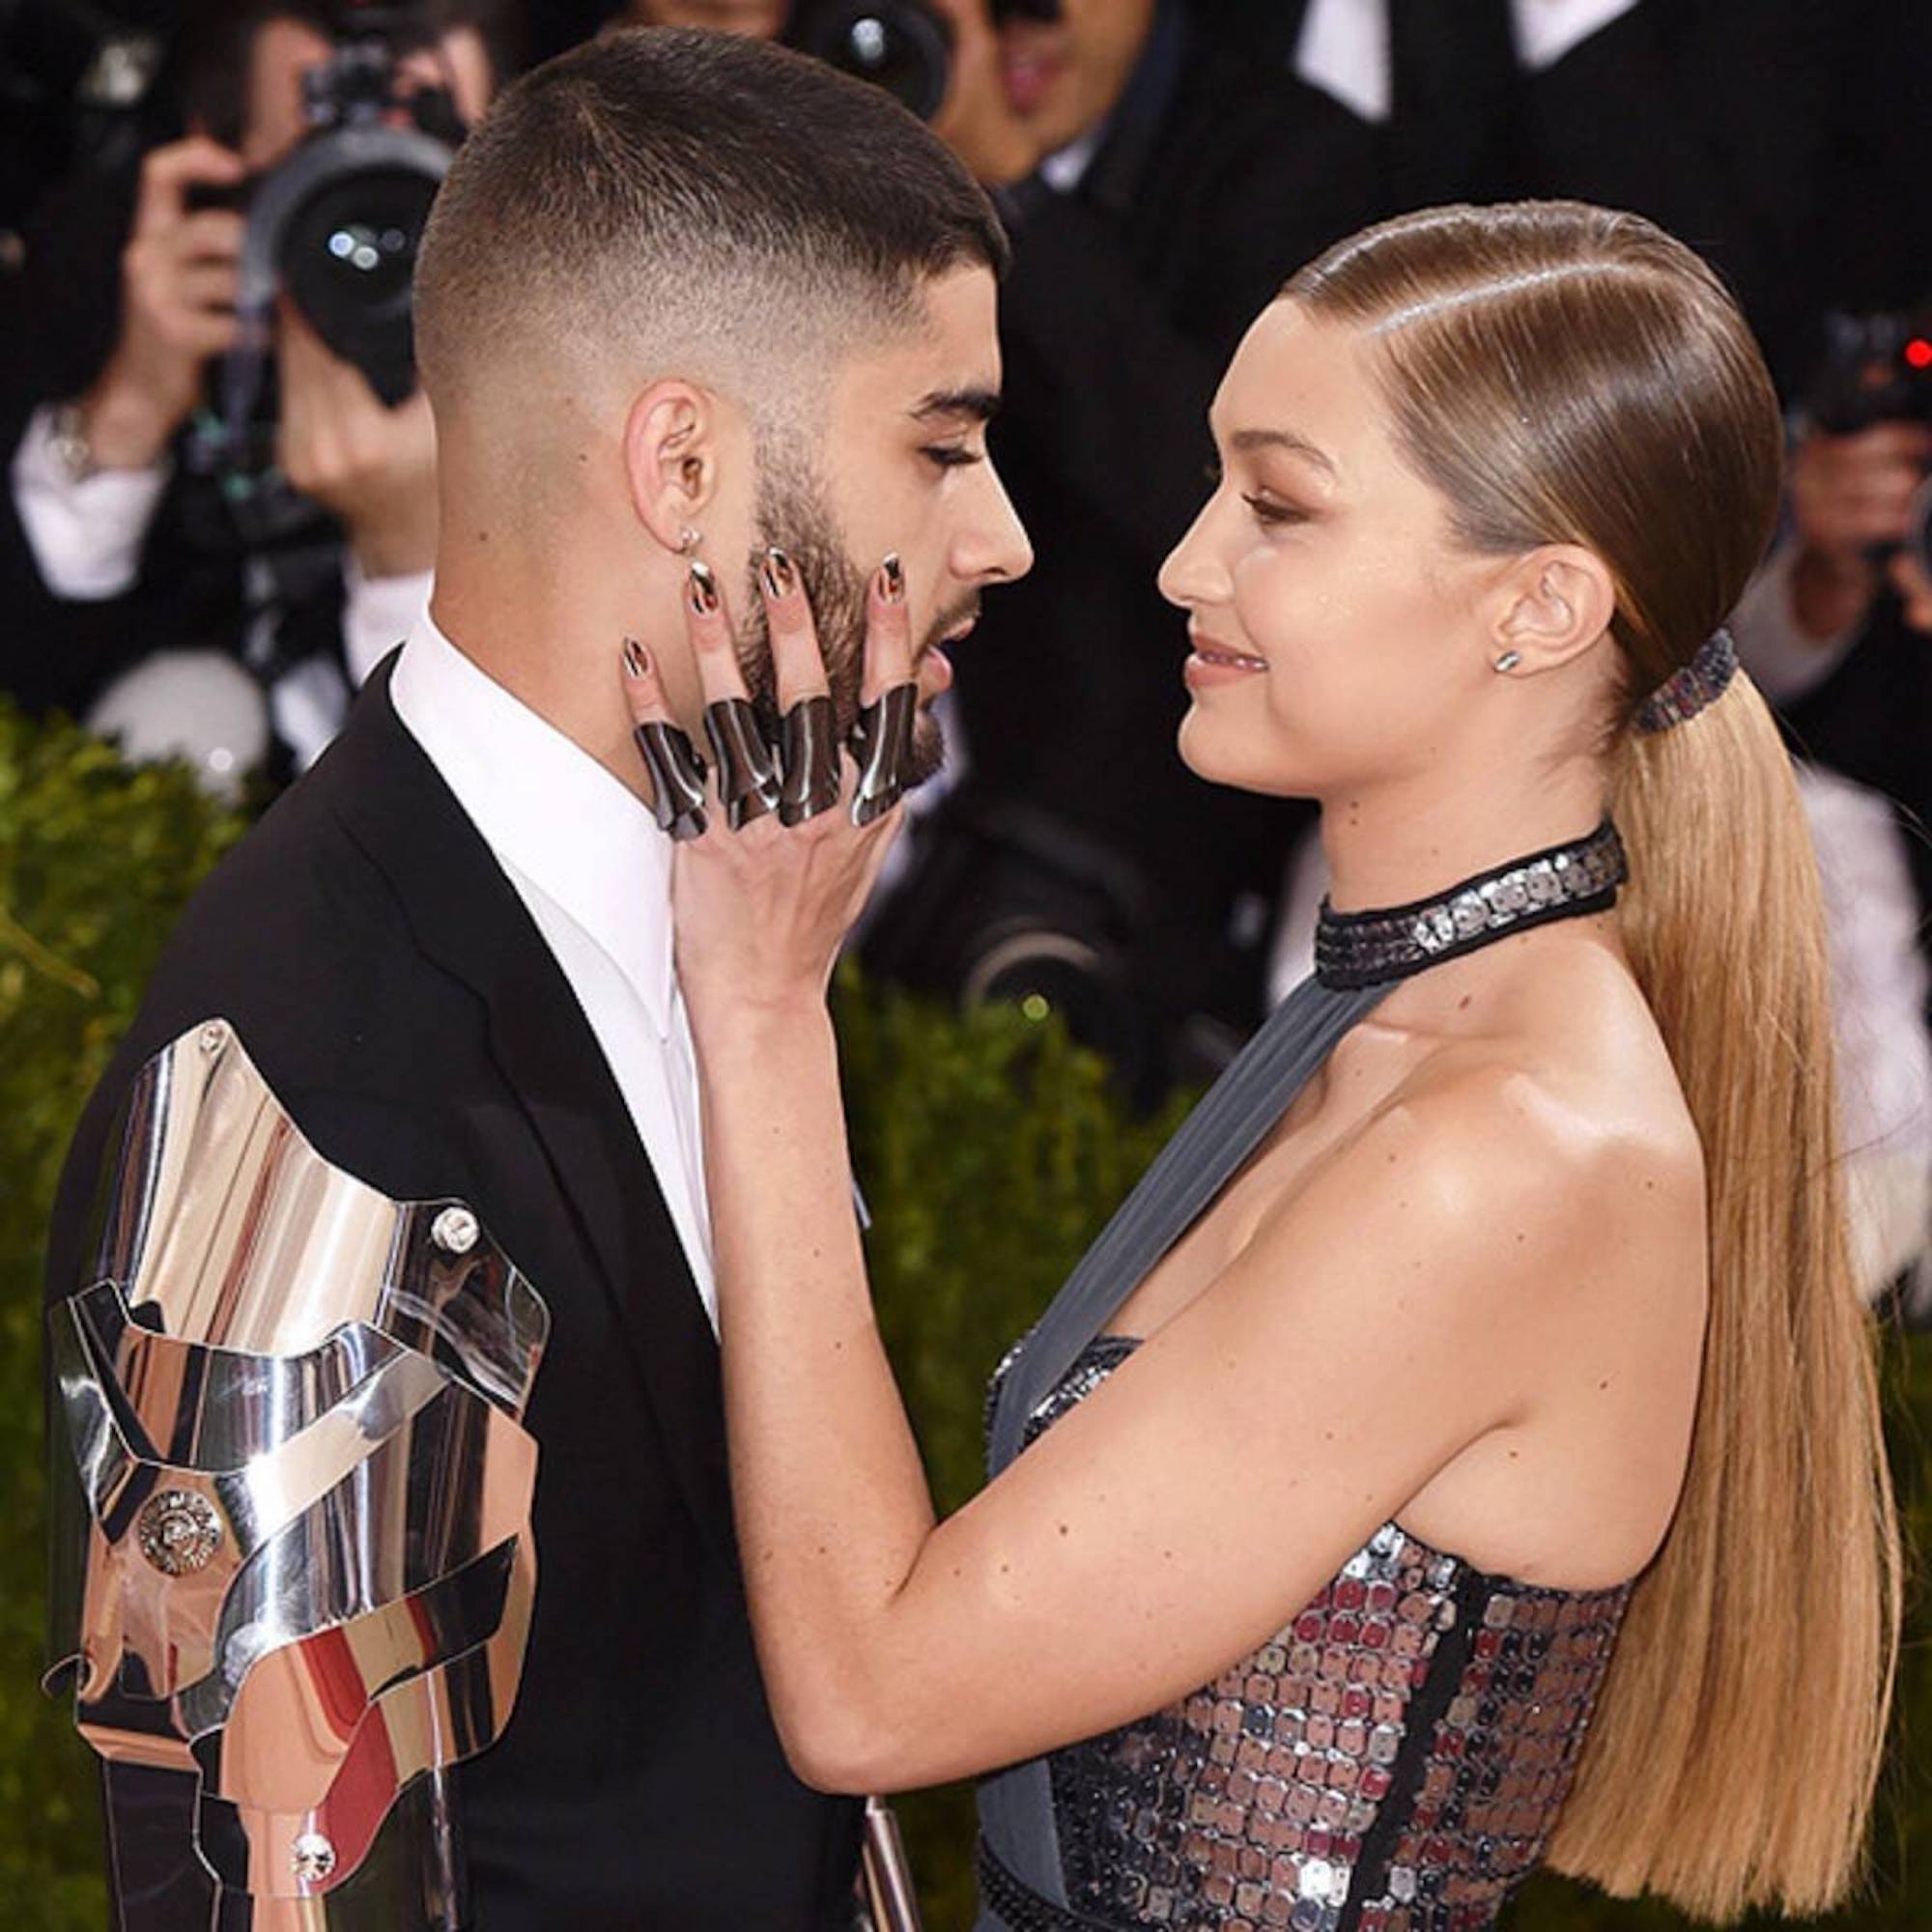 Gigi Hadid And Zayn Malik's Newborn Daughter's Handmade Blanket From Cozy Crew Club, spotted in Nursery and It's Freaking Adorable